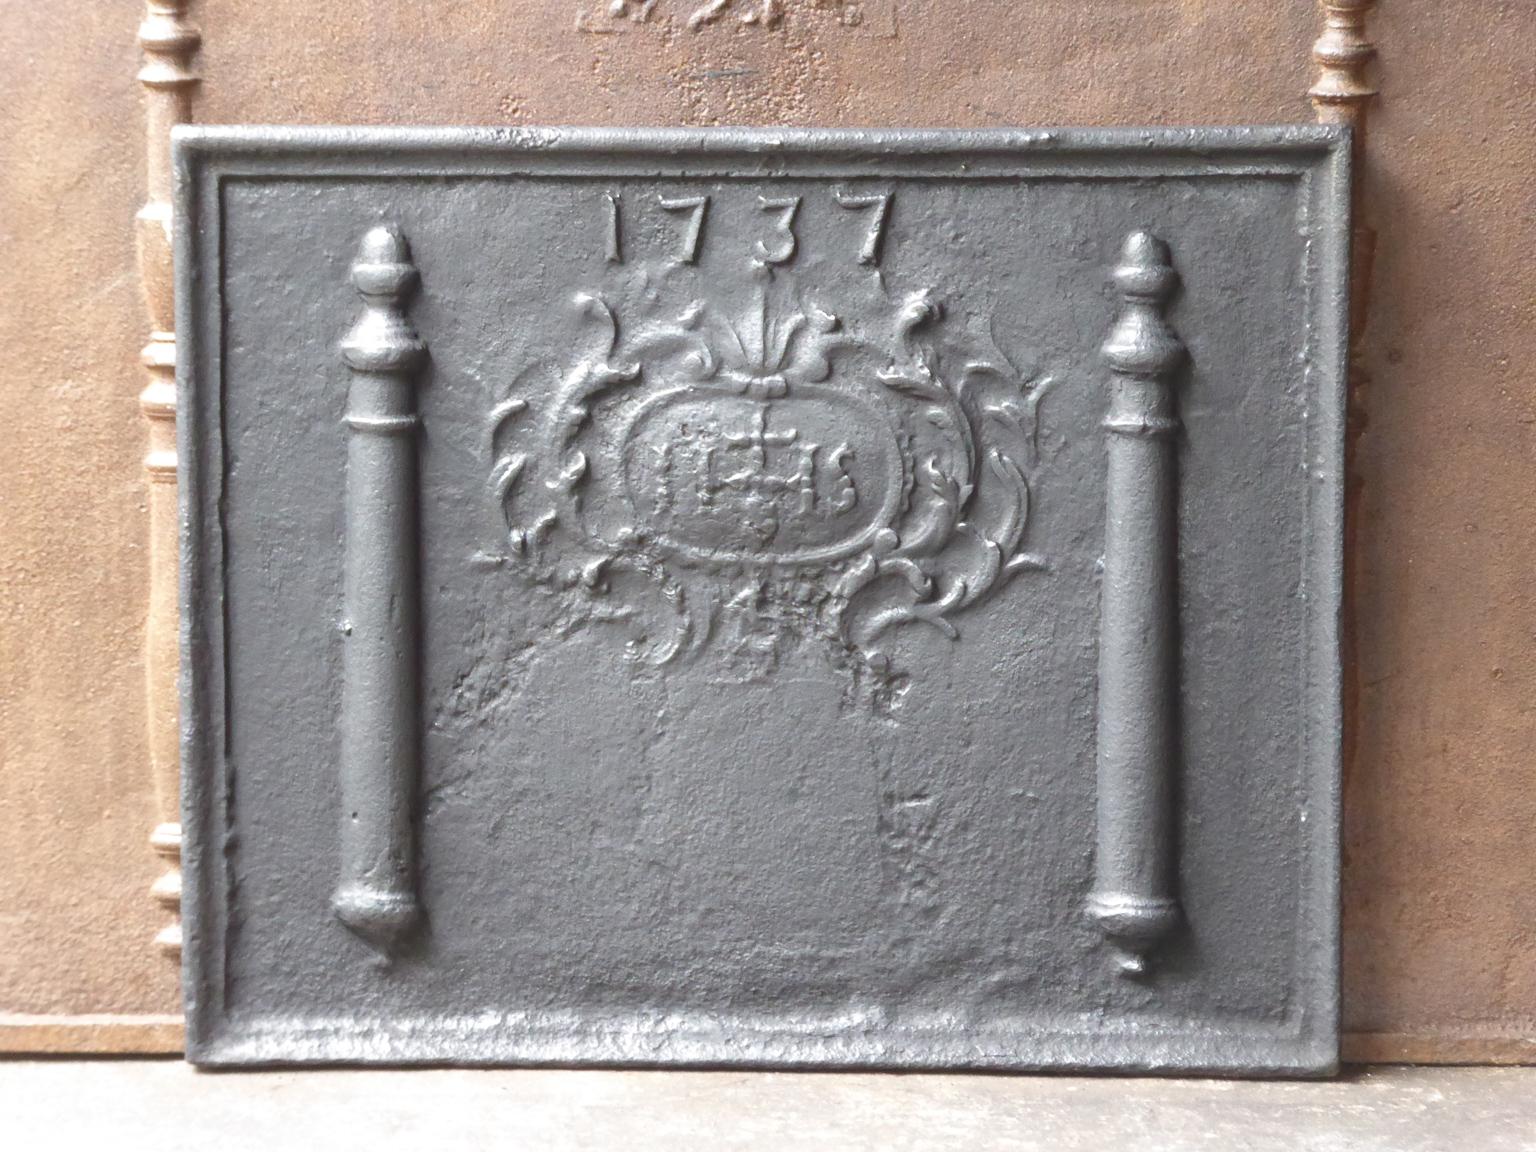 18th century French Louis XIV fireback with a IHS monogram and the date of production 1744. The monogram IHS stands for Iesus Hominum Salvator (Jezus the Savior of Humanity) or In Hoc Signo (In this sign will you win).

The fireback is made of